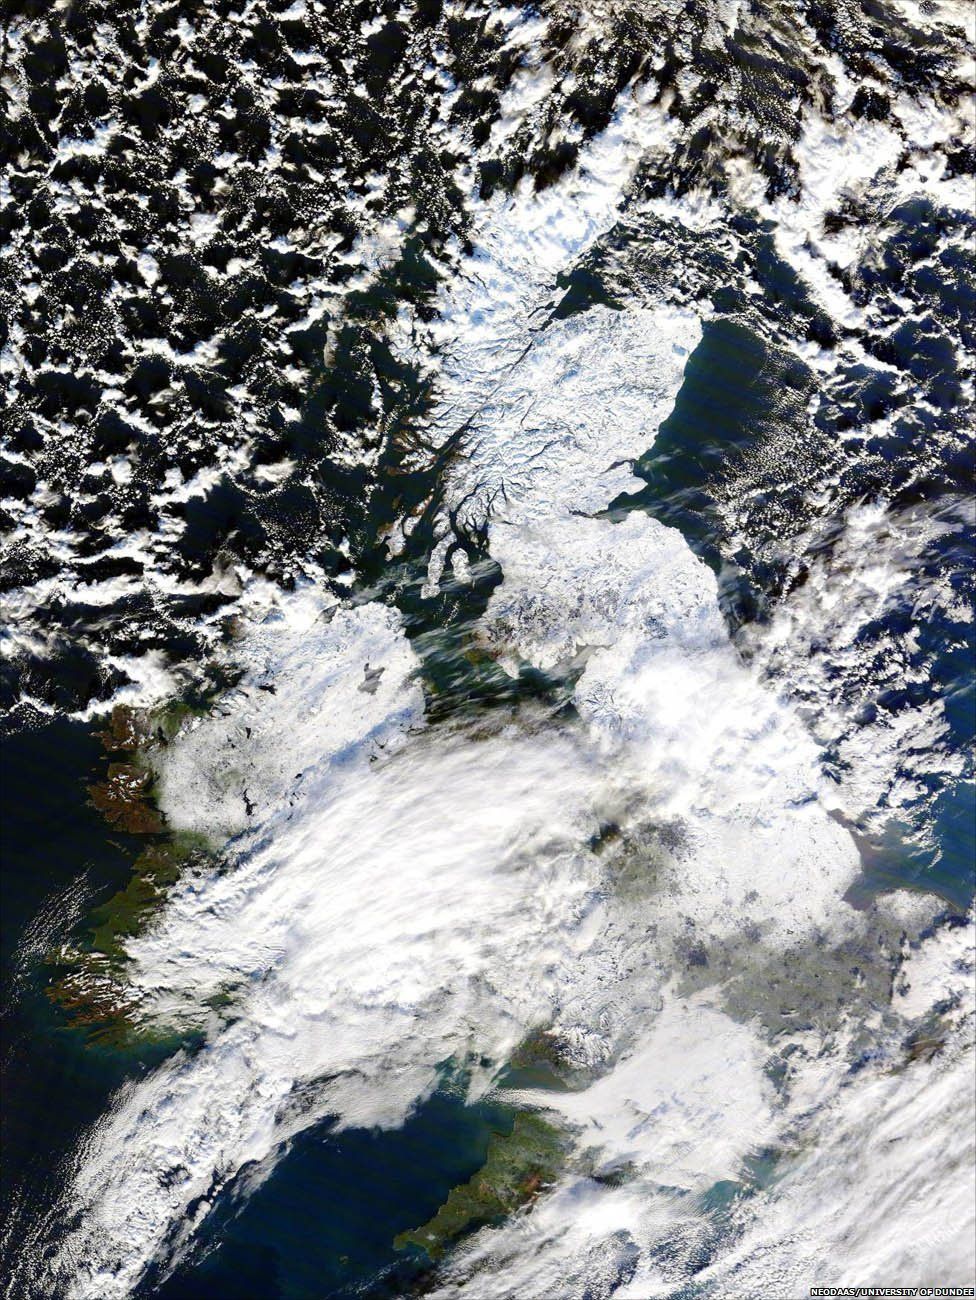 UK covered in snow (Pic courtesy of NEODAAS/University of Dundee)